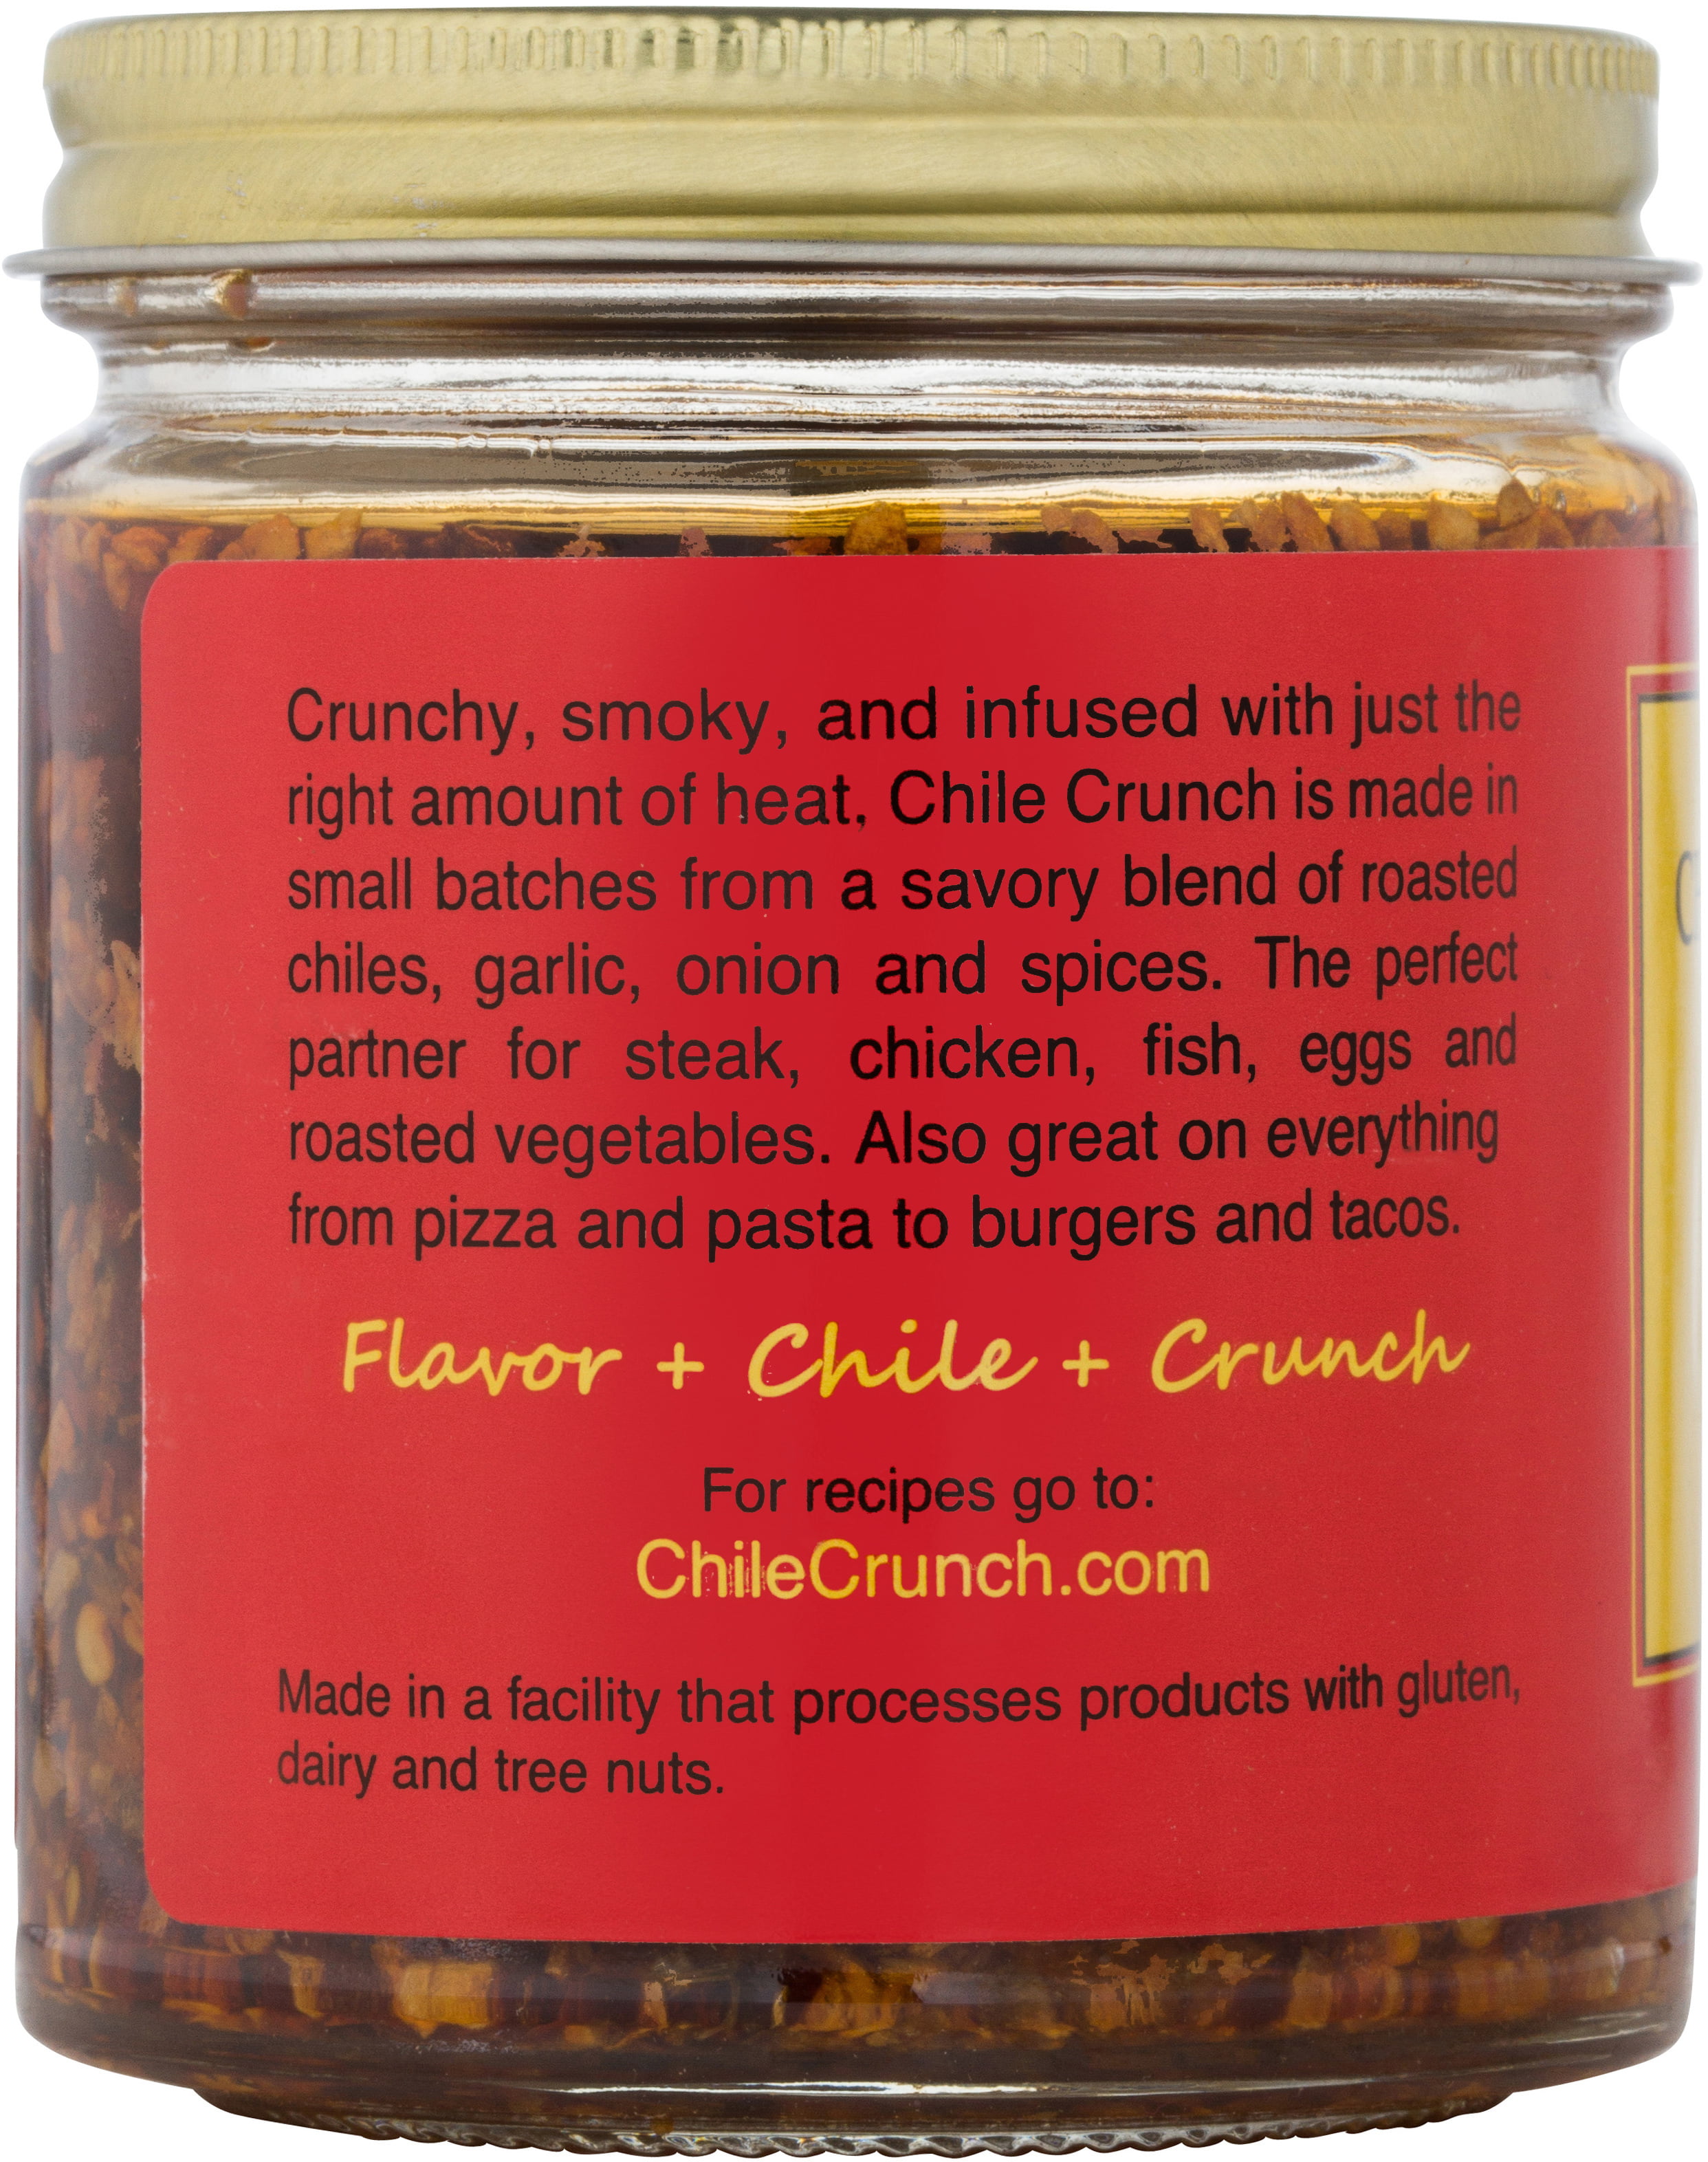 A Crunchy All Natural Spice Infused Condiment 2-Pack Chile Crunch Original 